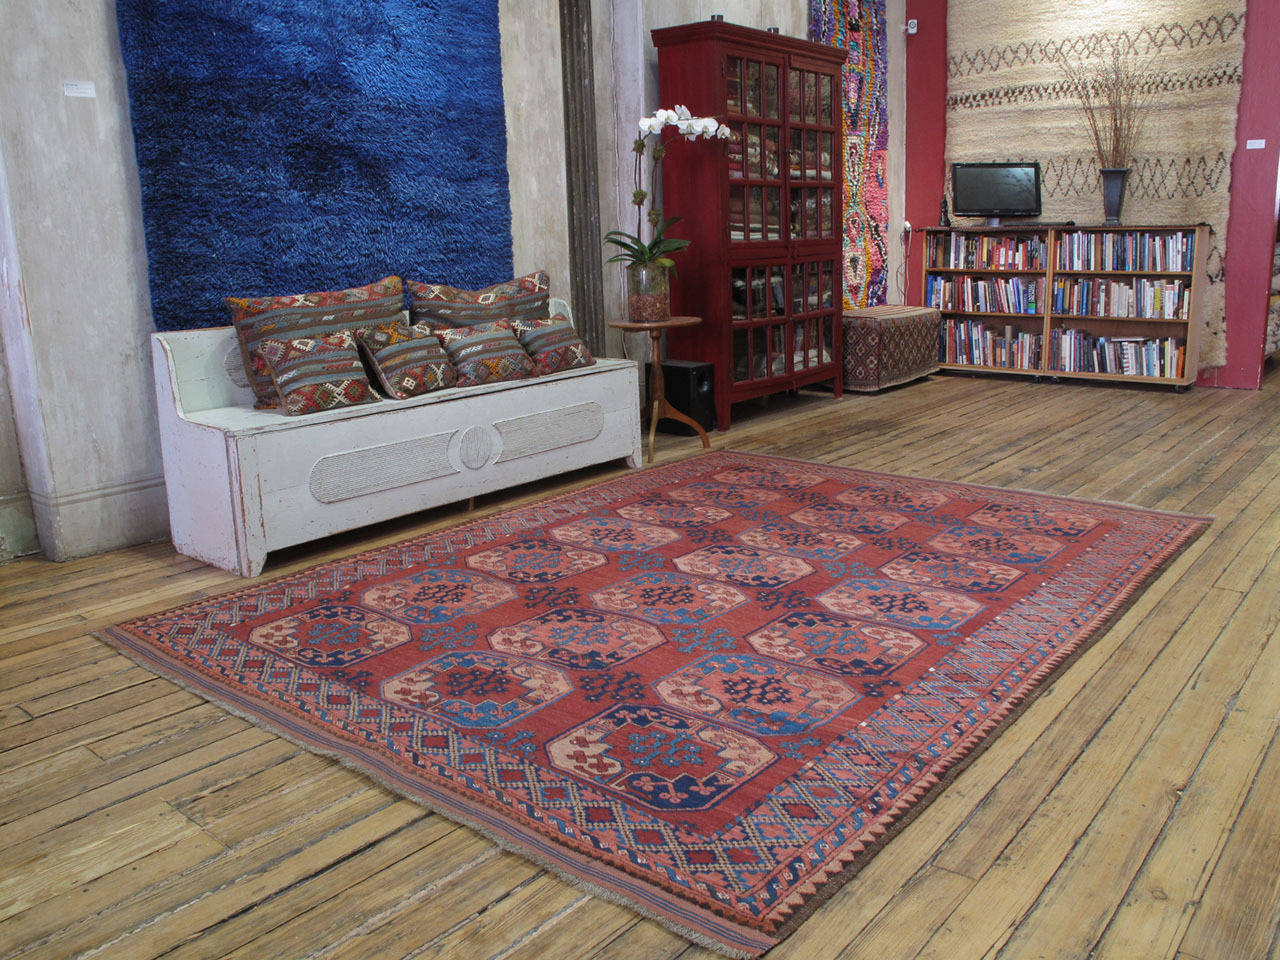 Antique Turkmen carpet or rug. An antique tribal carpet, woven by the Ersari Turkmen, featuring the classic design of this particular tribe. A very nice example with deeply saturated natural dyes, good design and large proportions. Carpet is